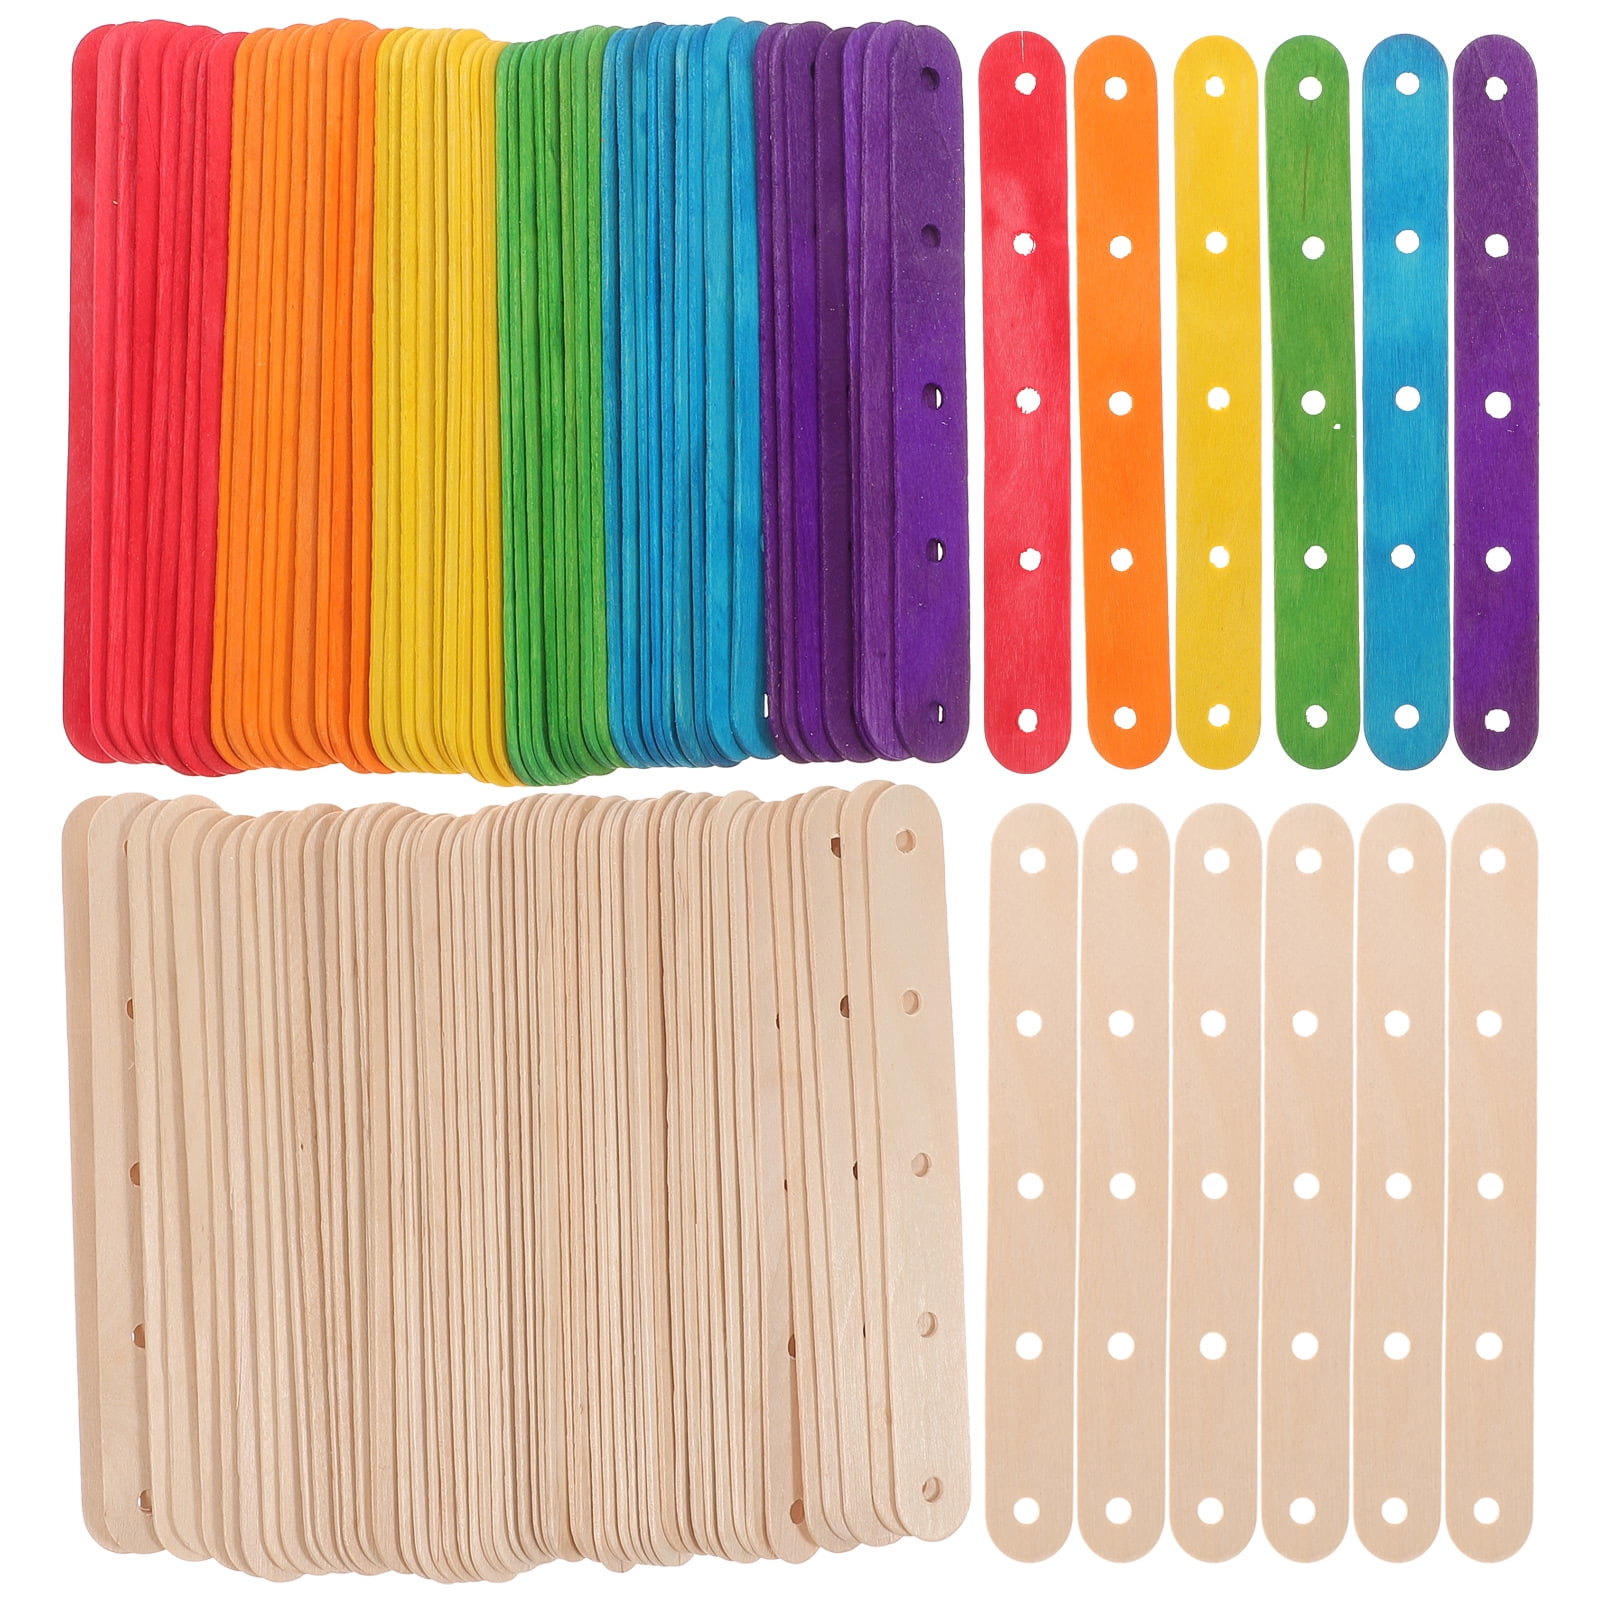  H&S Wooden Popsicle Sticks for Mixing and Ice Cream